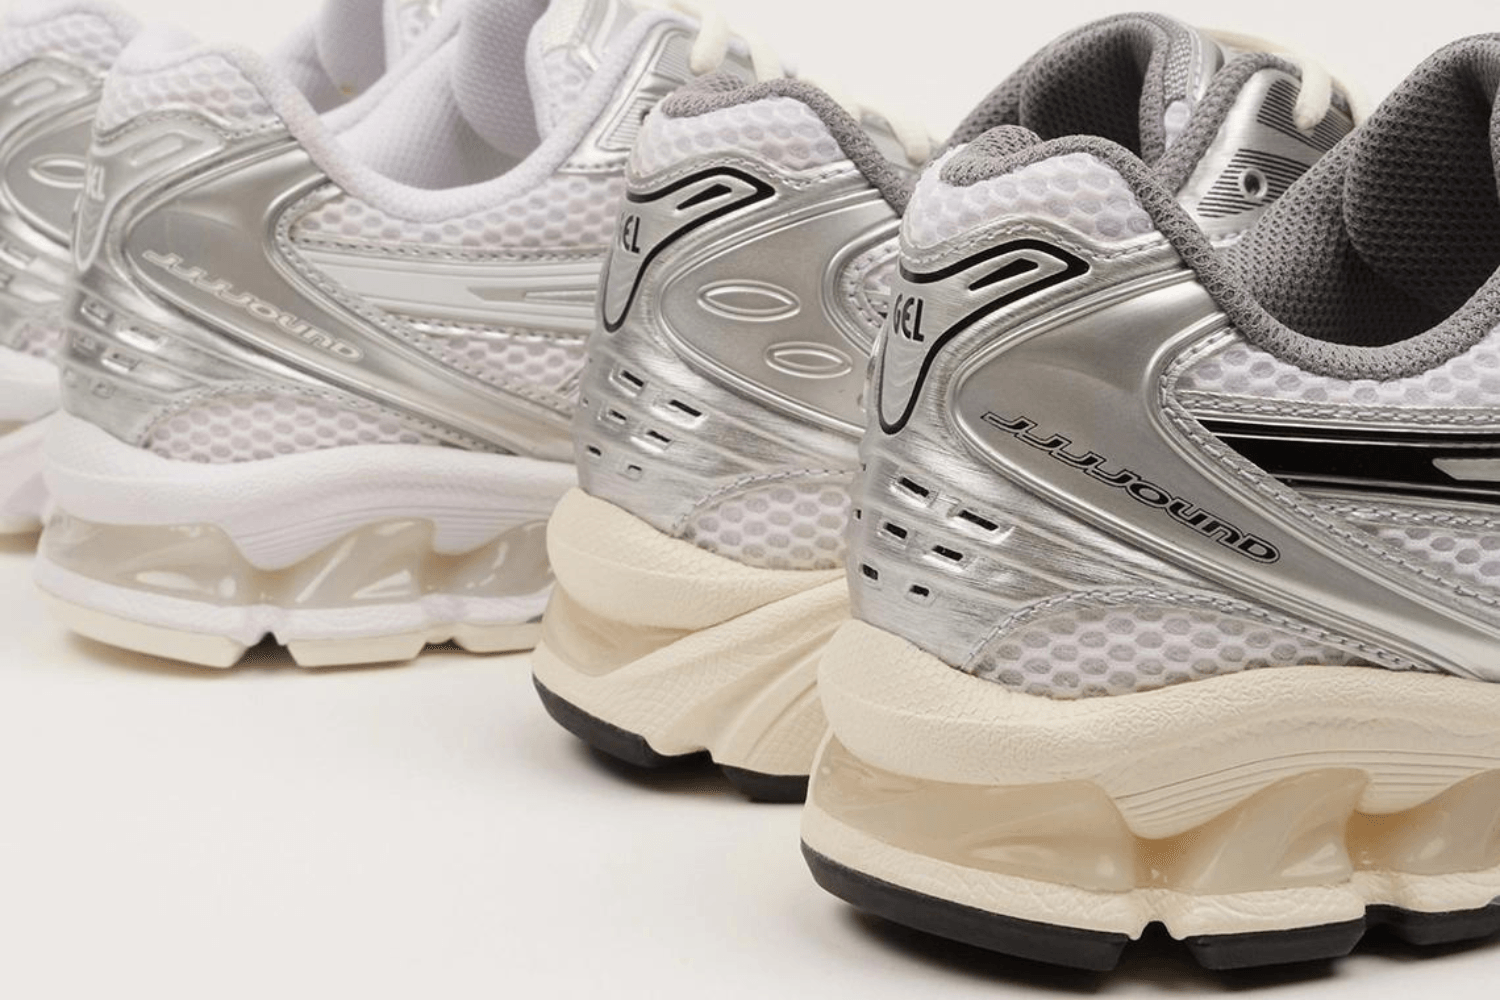 The JJJJound x ASICS GEL-Kayano 14 release is coming soon